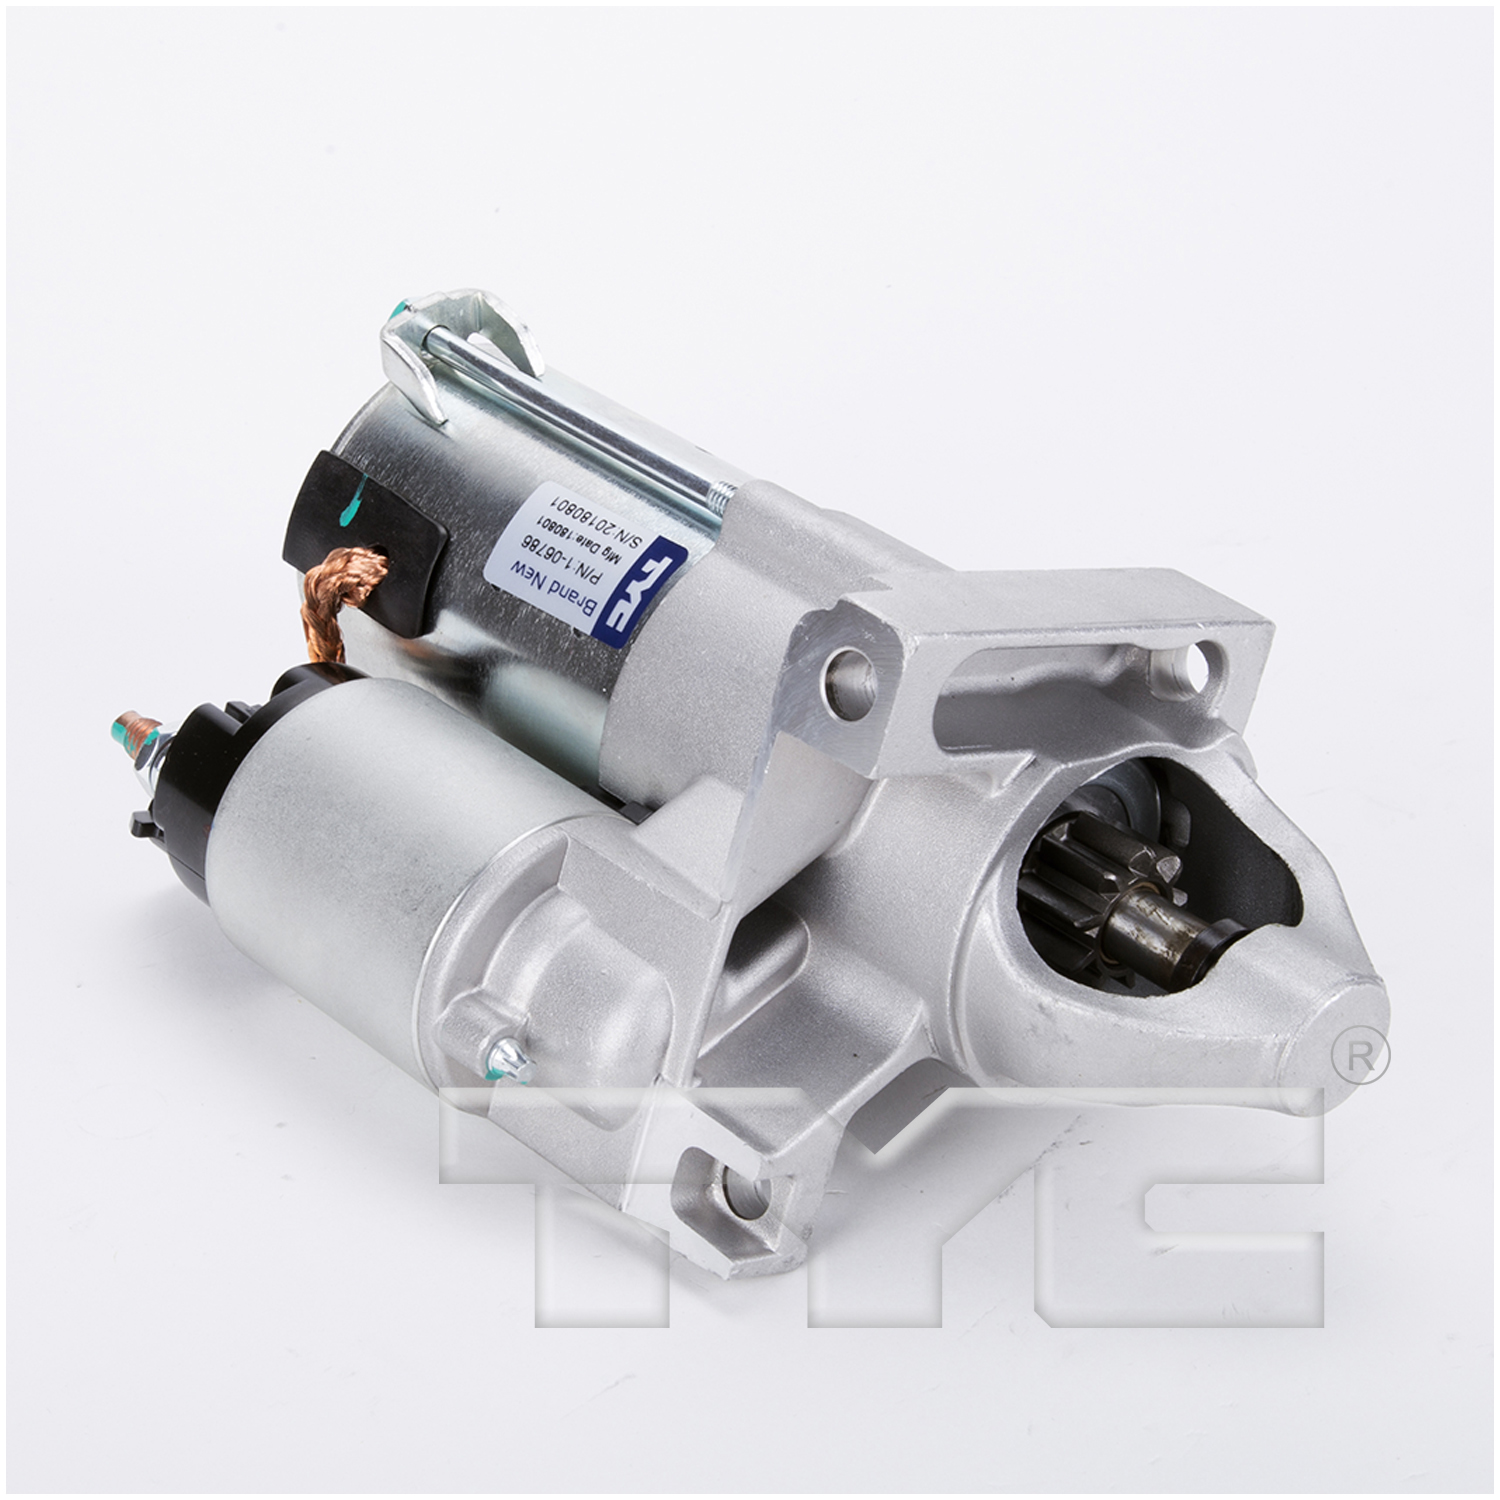 TYC-1-06786_NEW TYC STARTER 12V 9T CW PMGR DELCO PG260D